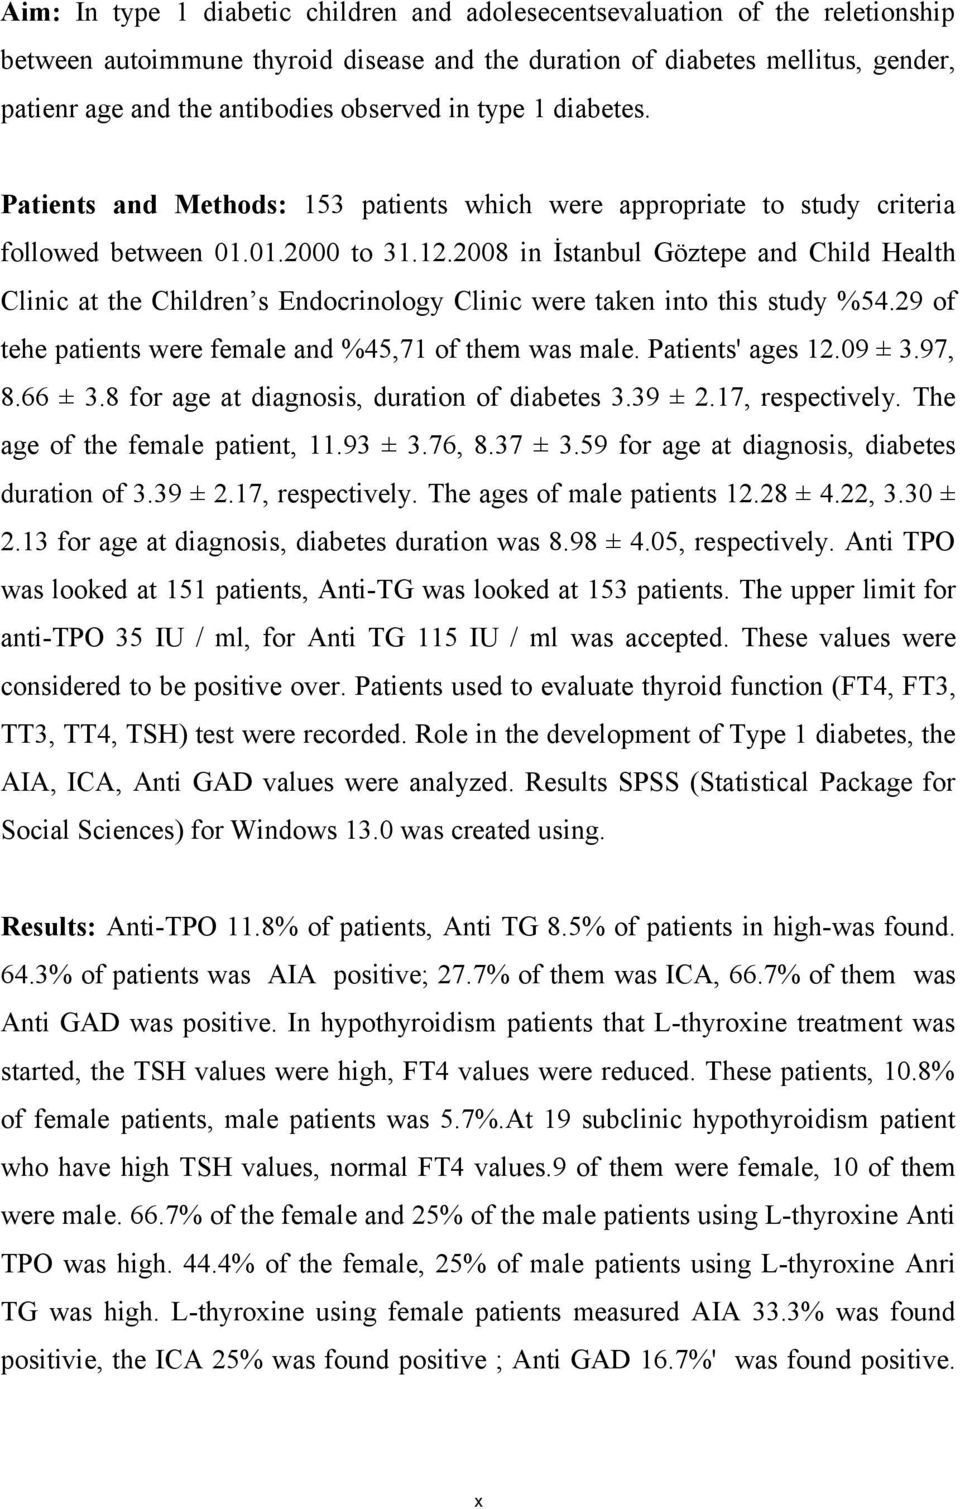 2008 in İstanbul Göztepe and Child Health Clinic at the Children s Endocrinology Clinic were taken into this study %54.29 of tehe patients were female and %45,71 of them was male. Patients' ages 12.